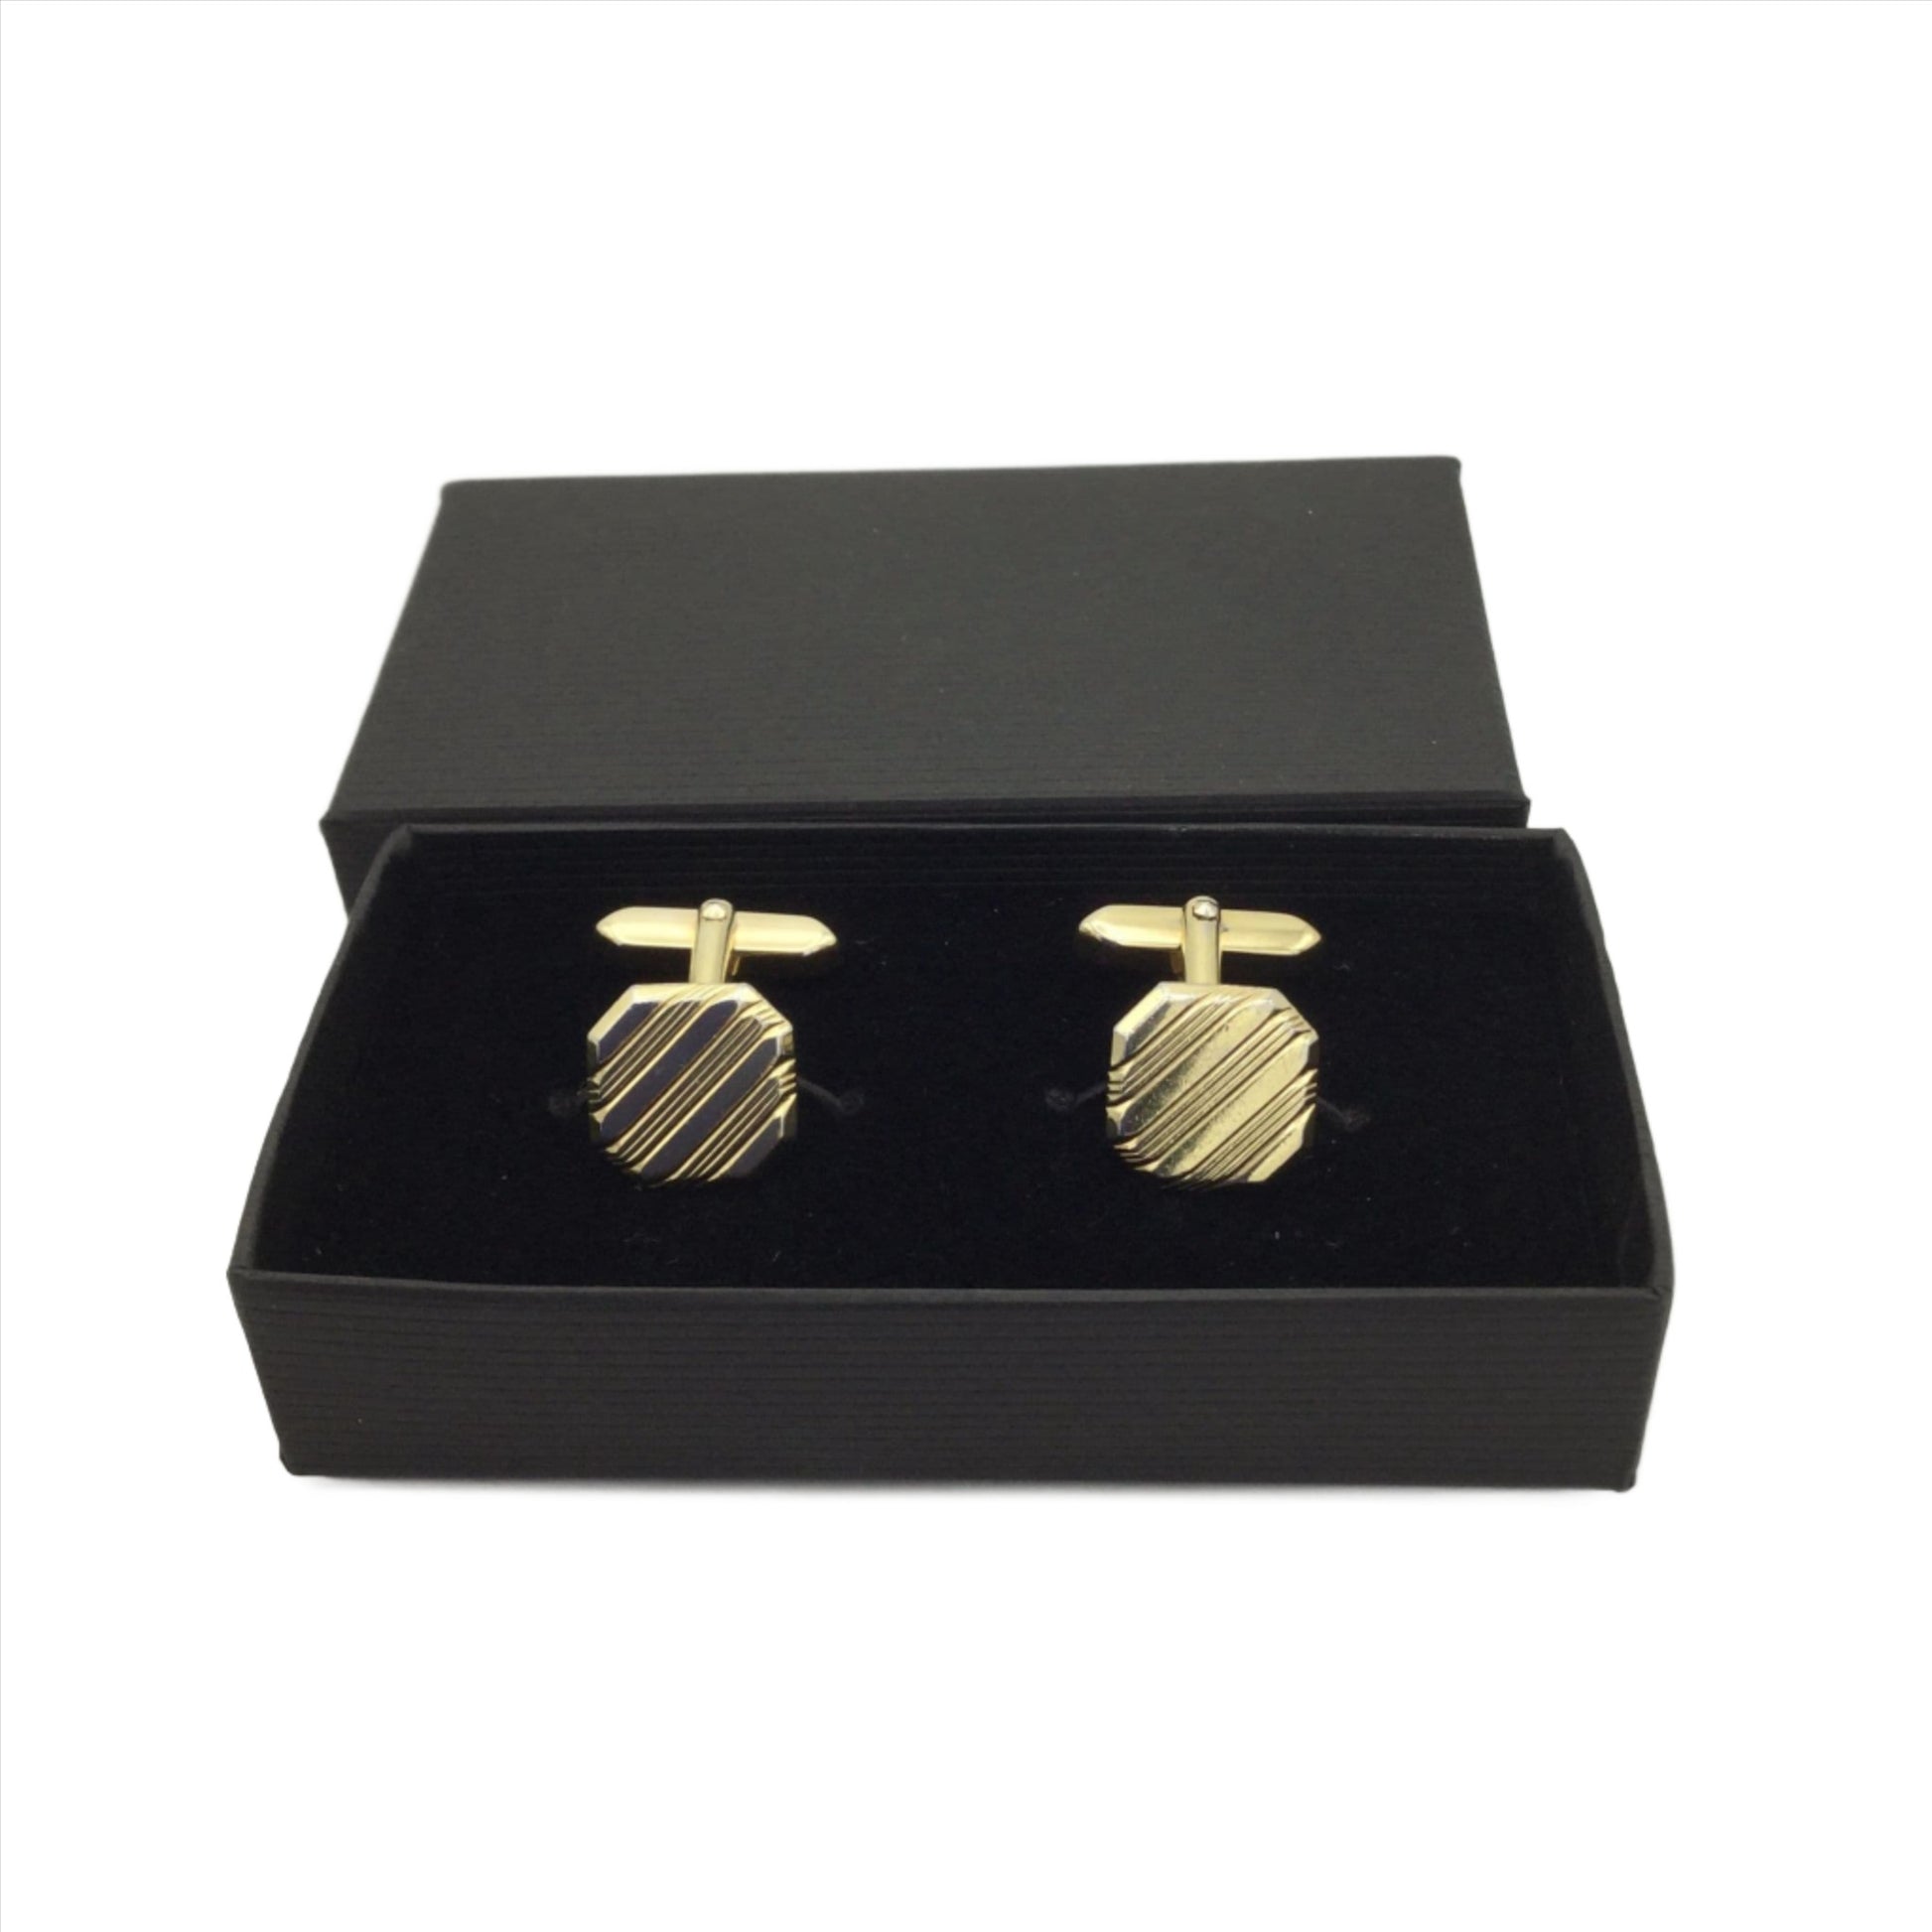 gold coloured square cufflinks with a striped pattern in an open black box